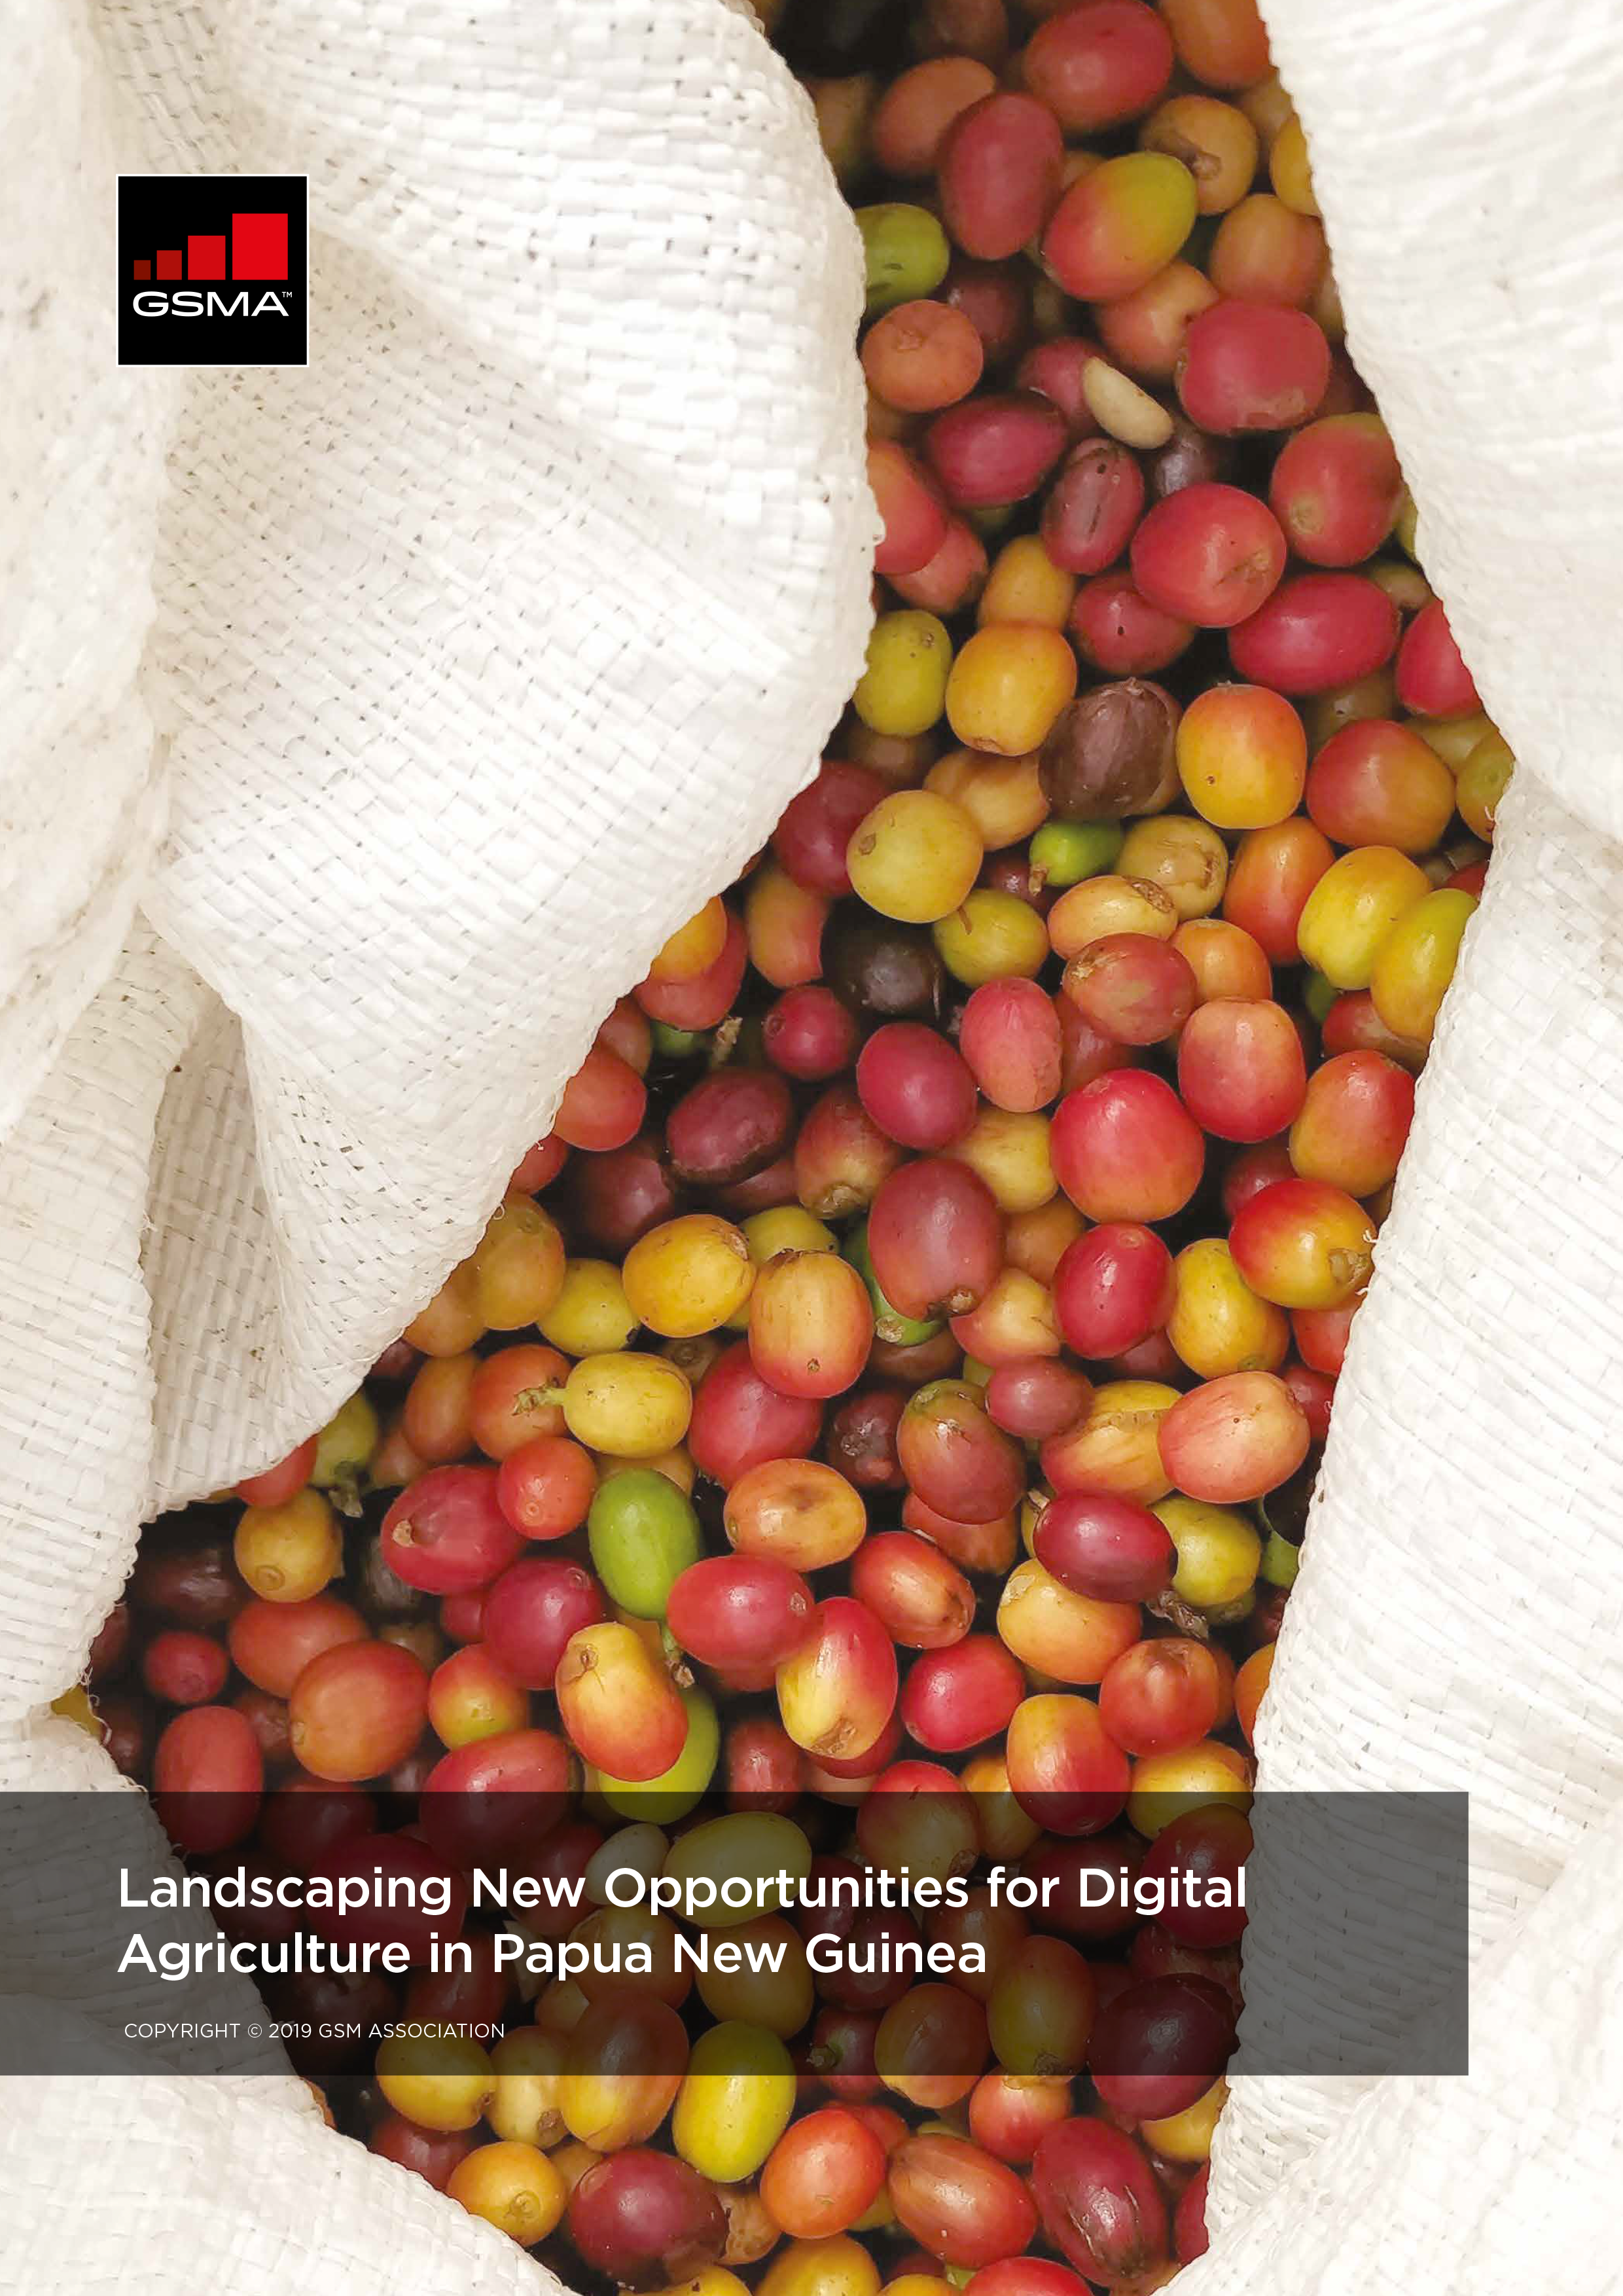 Landscaping New Opportunities for Digital Agriculture in Papua New Guinea image